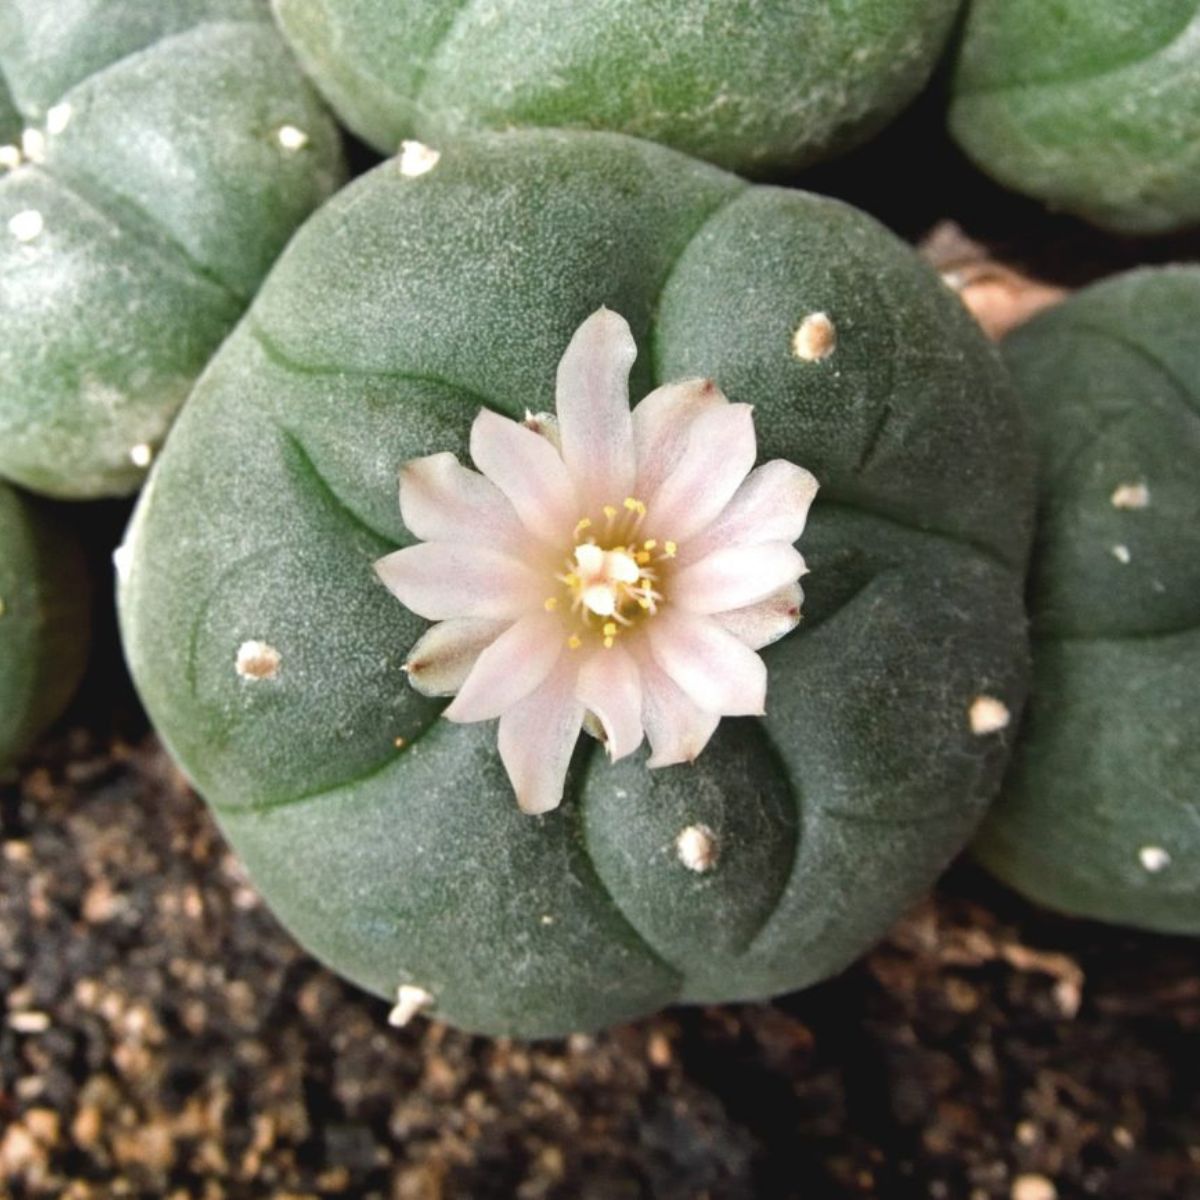 Among five poisonous cacti for children and pets is the Peyote cacti on Thursd